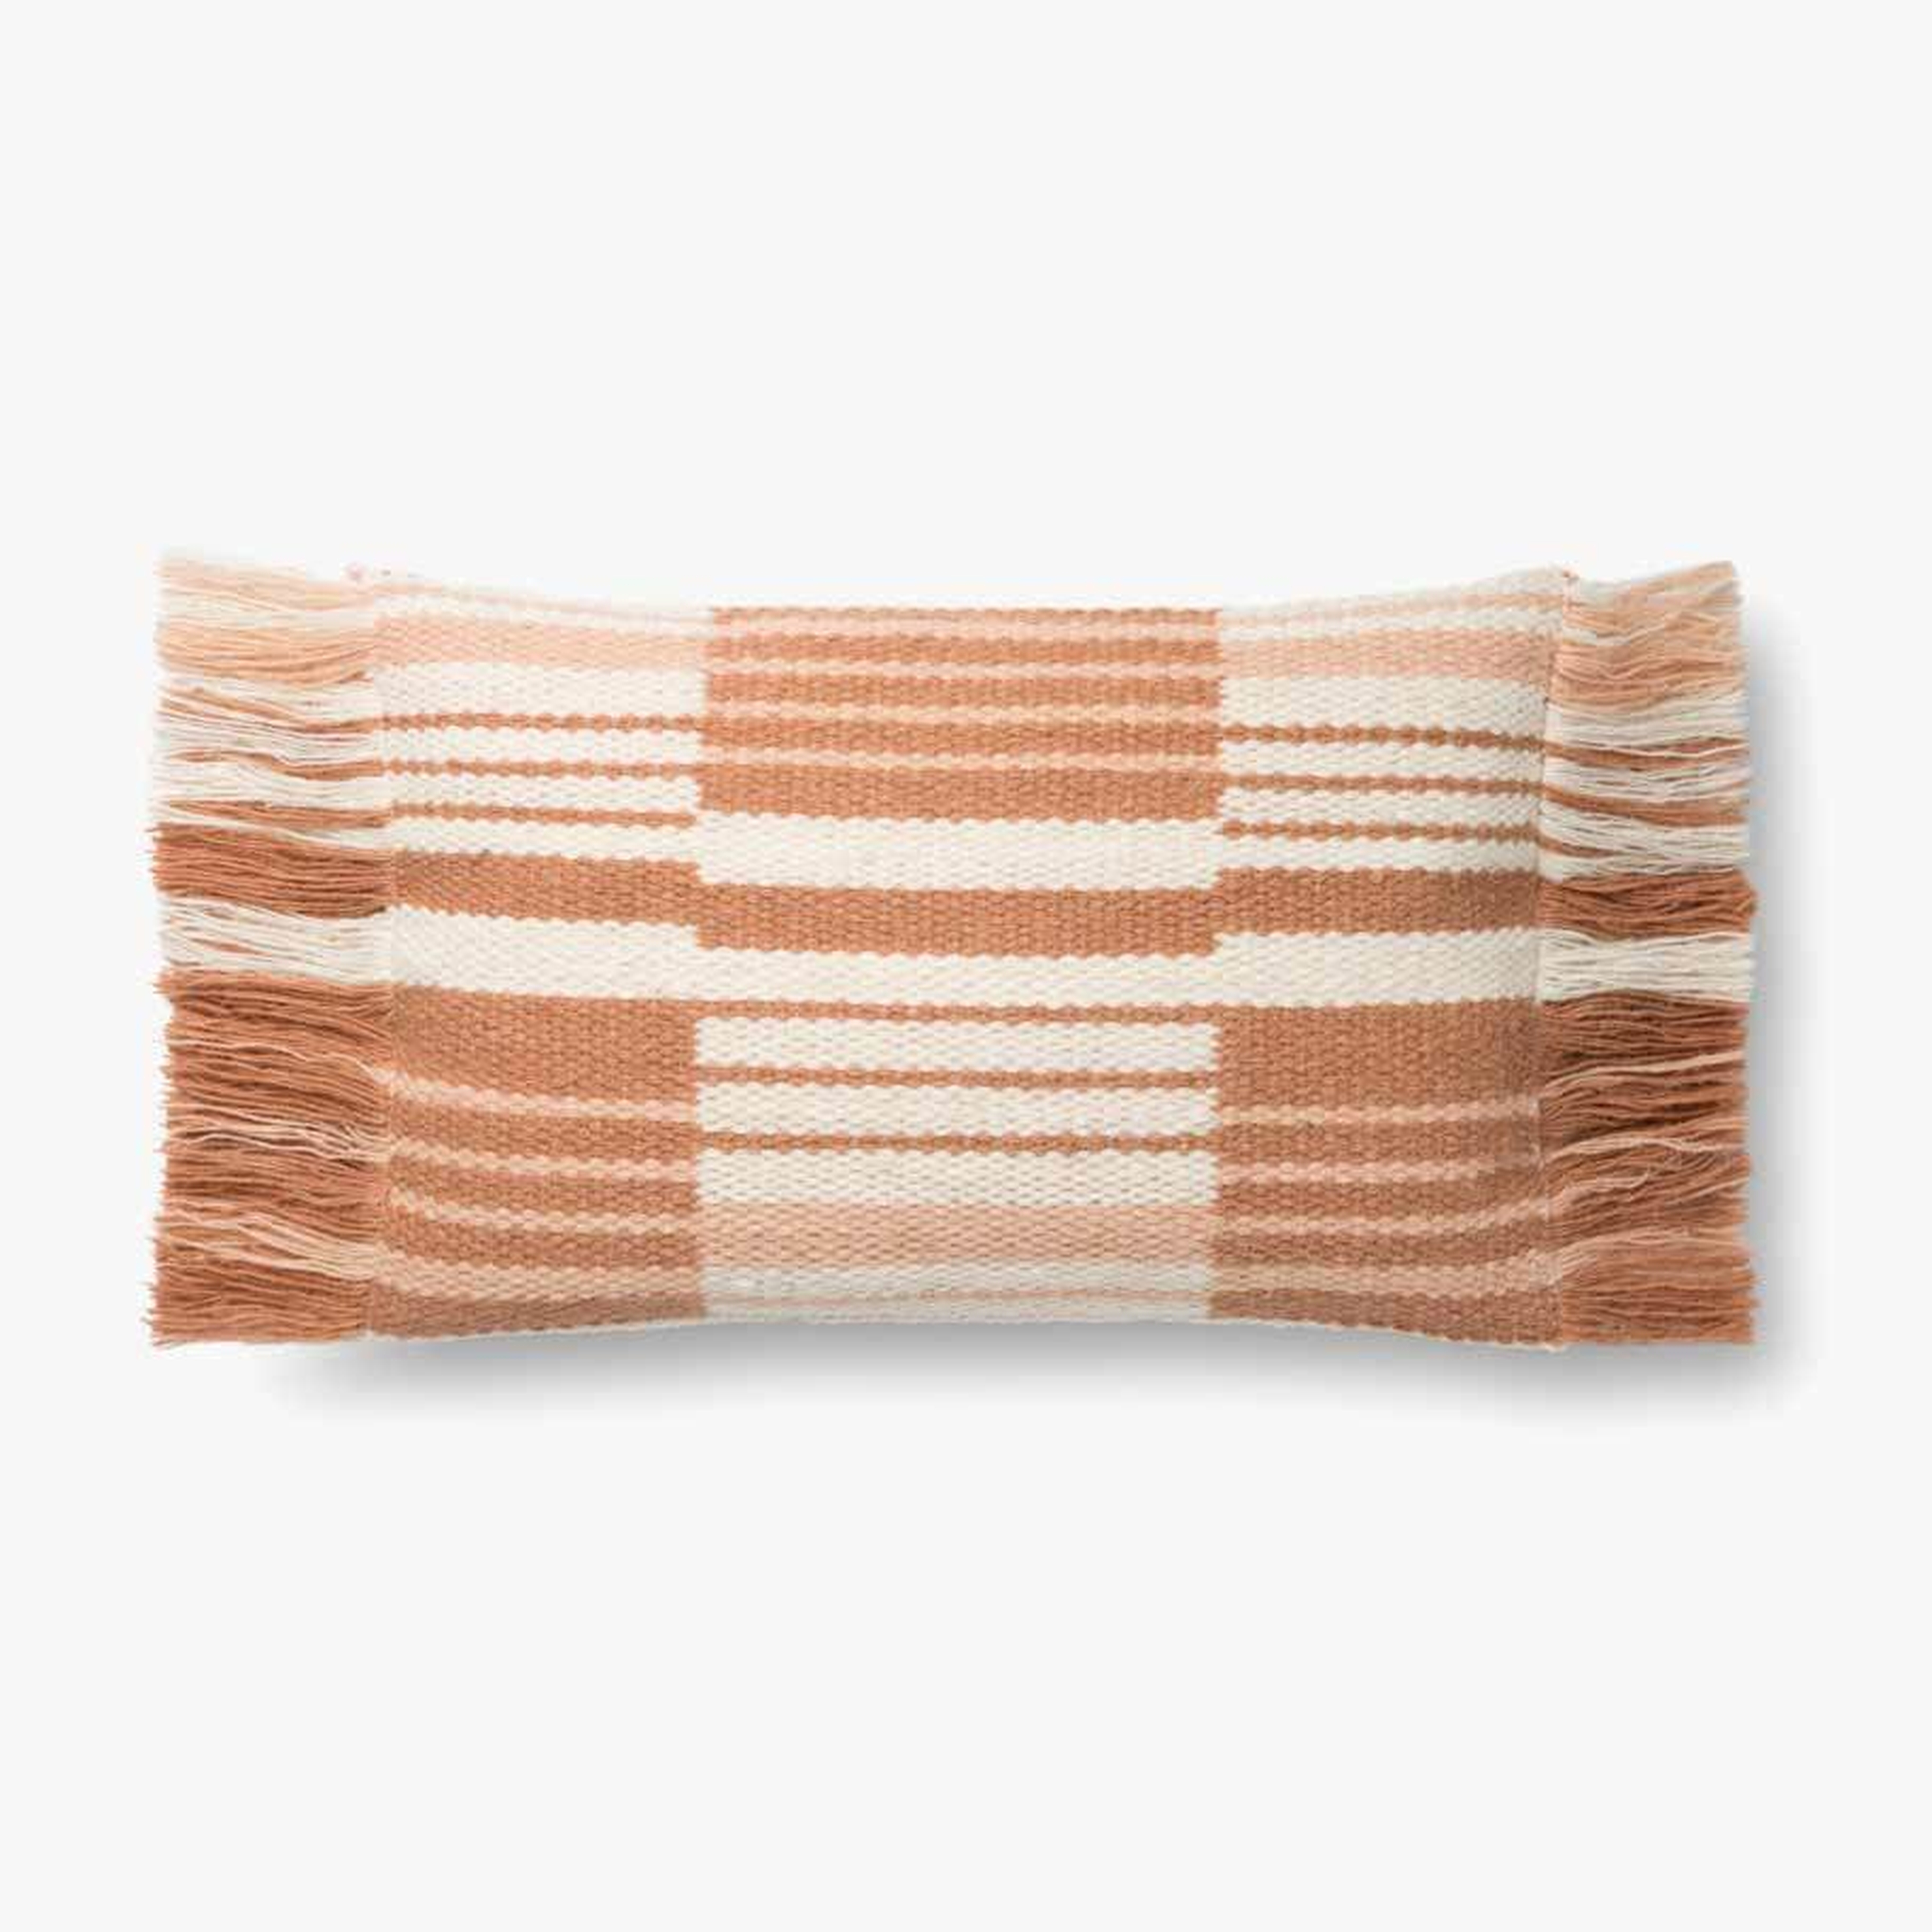 Magnolia Home by Joanna Gaines PILLOWS P1129 TERRACOTTA / IVORY 13" x 21" Cover w/Down - Magnolia Home by Joana Gaines Crafted by Loloi Rugs